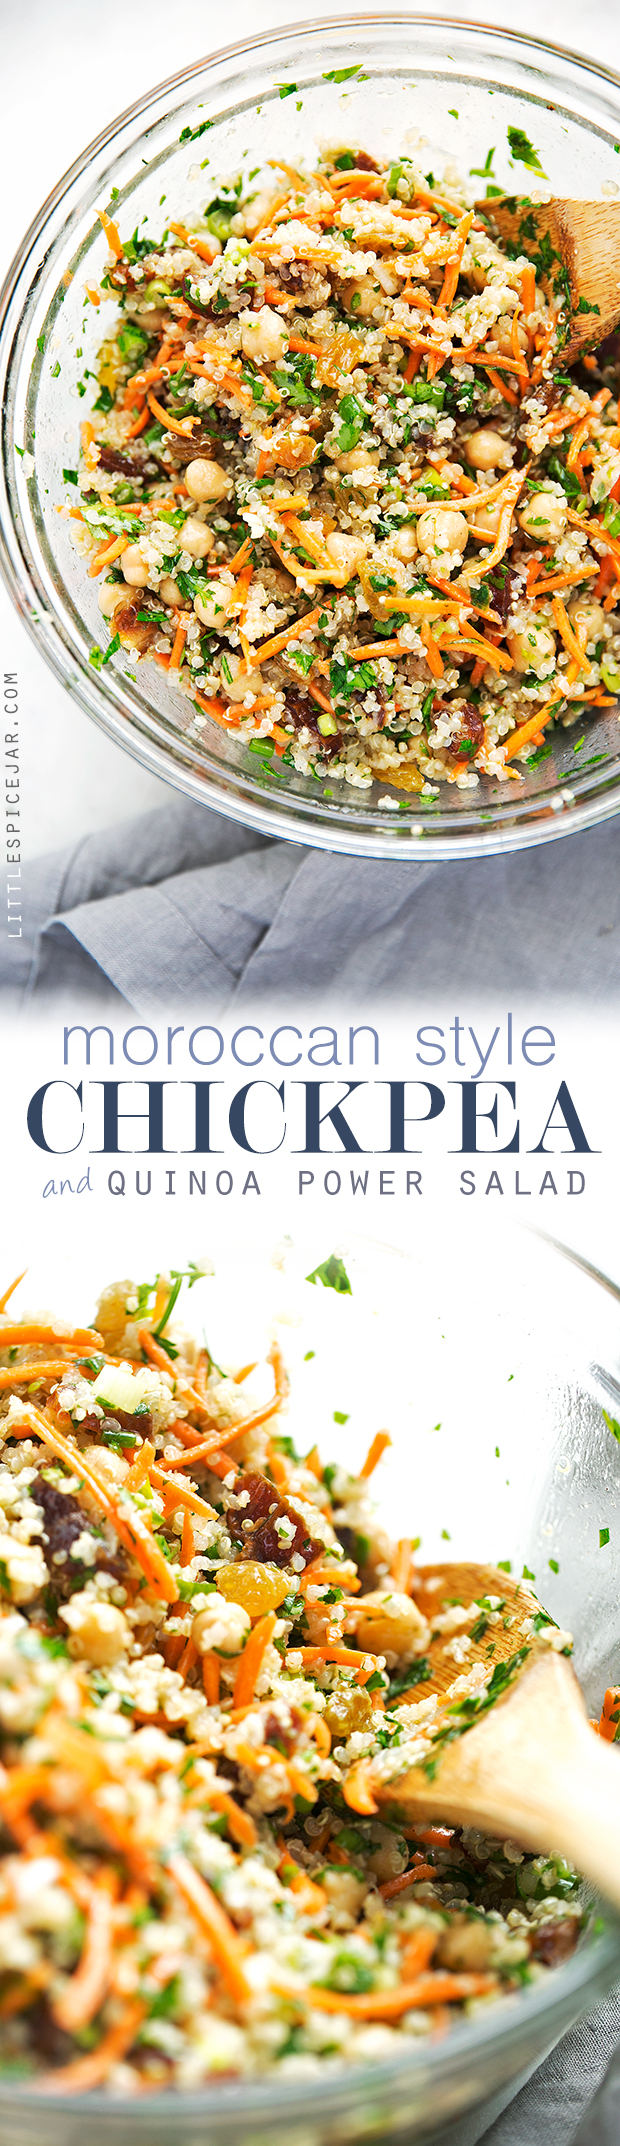 Moroccan Chickpea Quinoa Power Salad - A quick salad loaded with sooo much flavor and it's perfect as a side or a main meal! #vegan #vegetarian #powersalad #quinoasalad | Littlespicejar.com